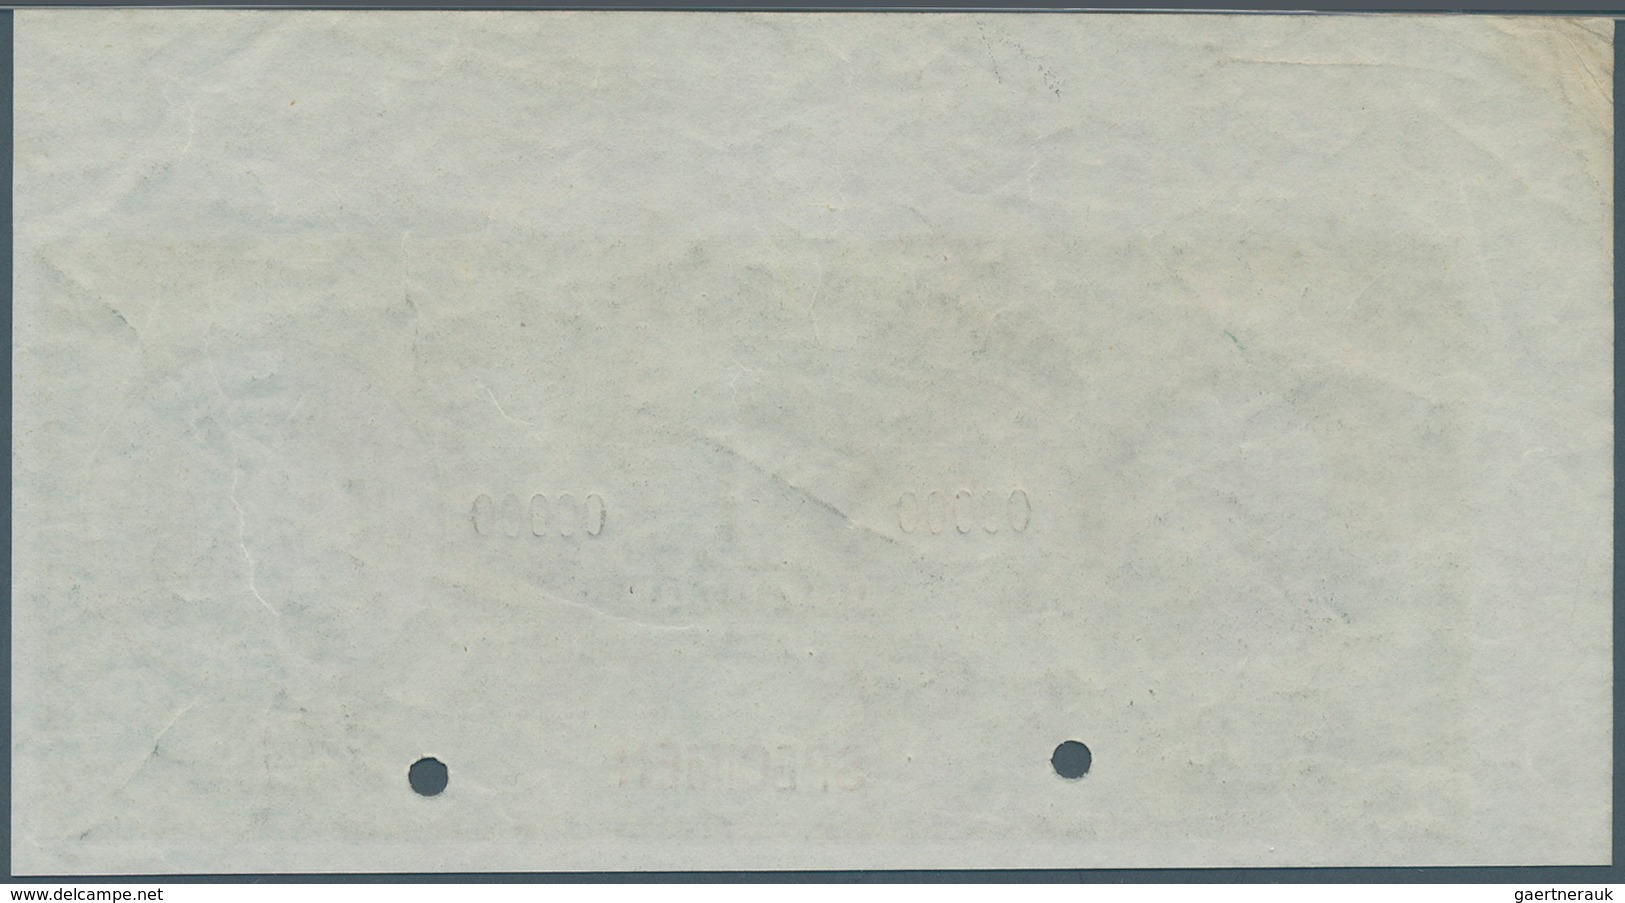 Costa Rica: 1 Colon ND(1905-06) SPECIMEN, P.142s With Hand Stamped Date July 1903 At Upper Part Of T - Costa Rica